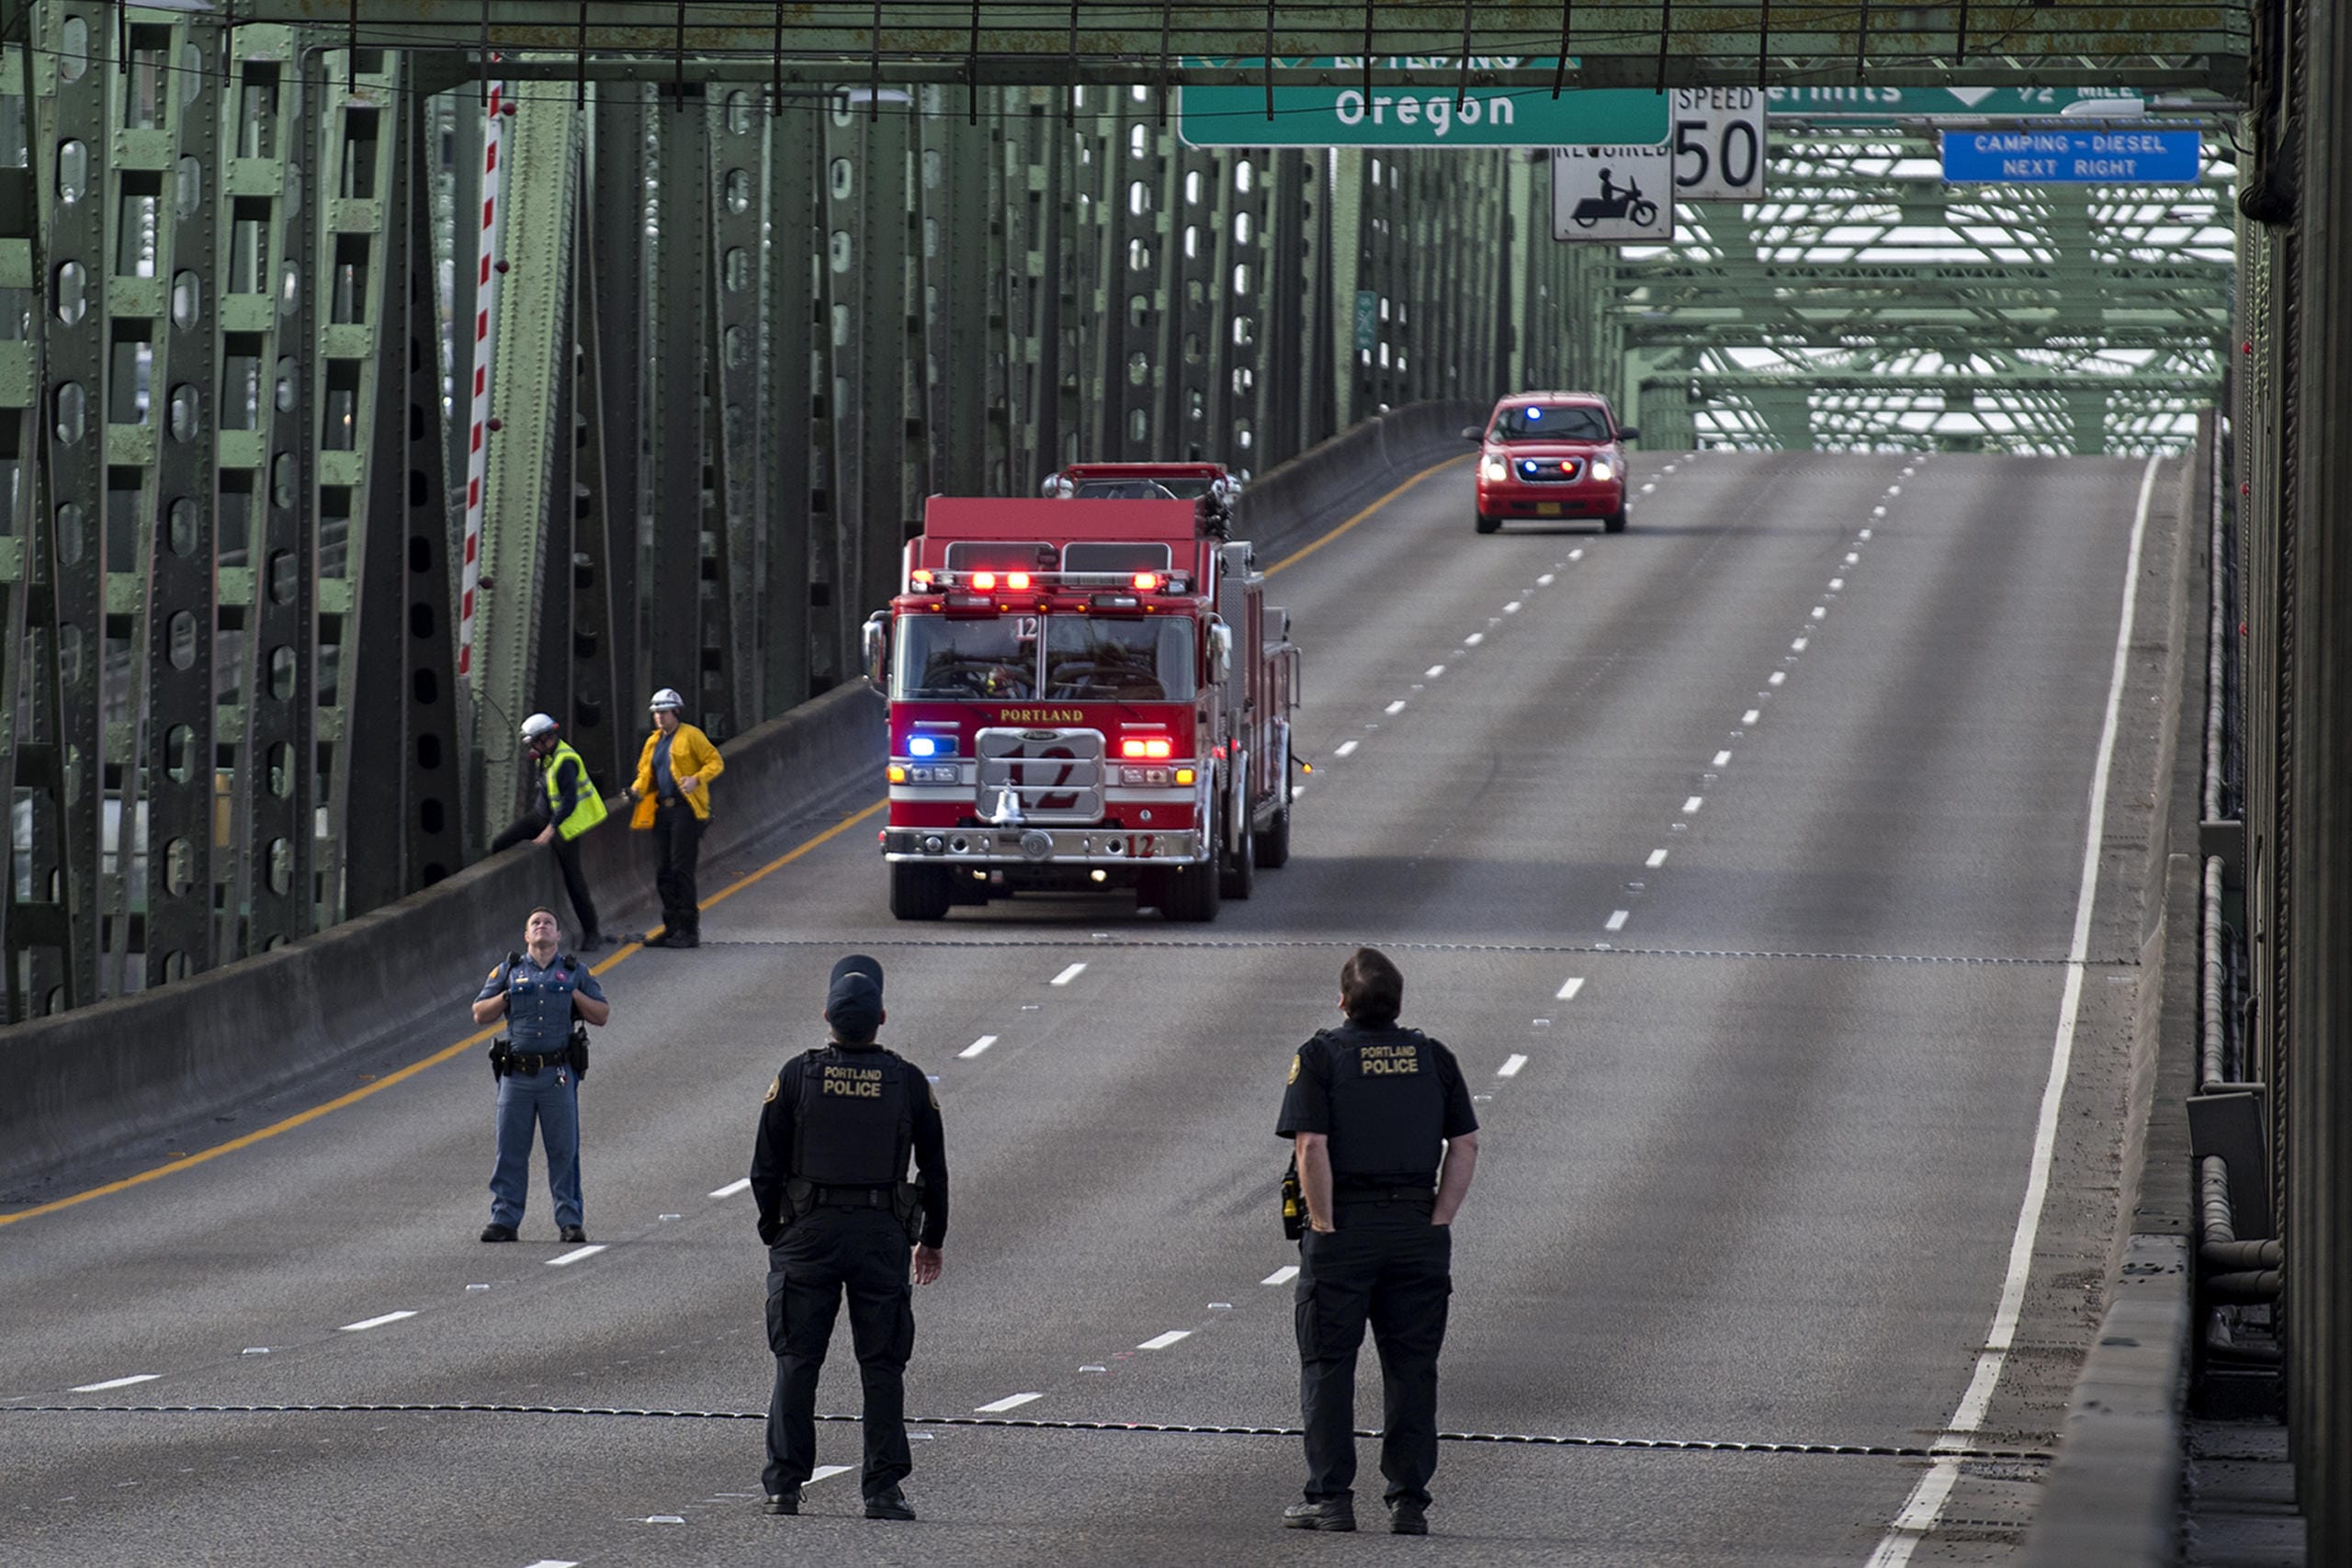 First responders keep an eye on the scene as police work on the Interstate Bridge as lanes are cleared of traffic on Tuesday morning, Oct. 20, 2020.